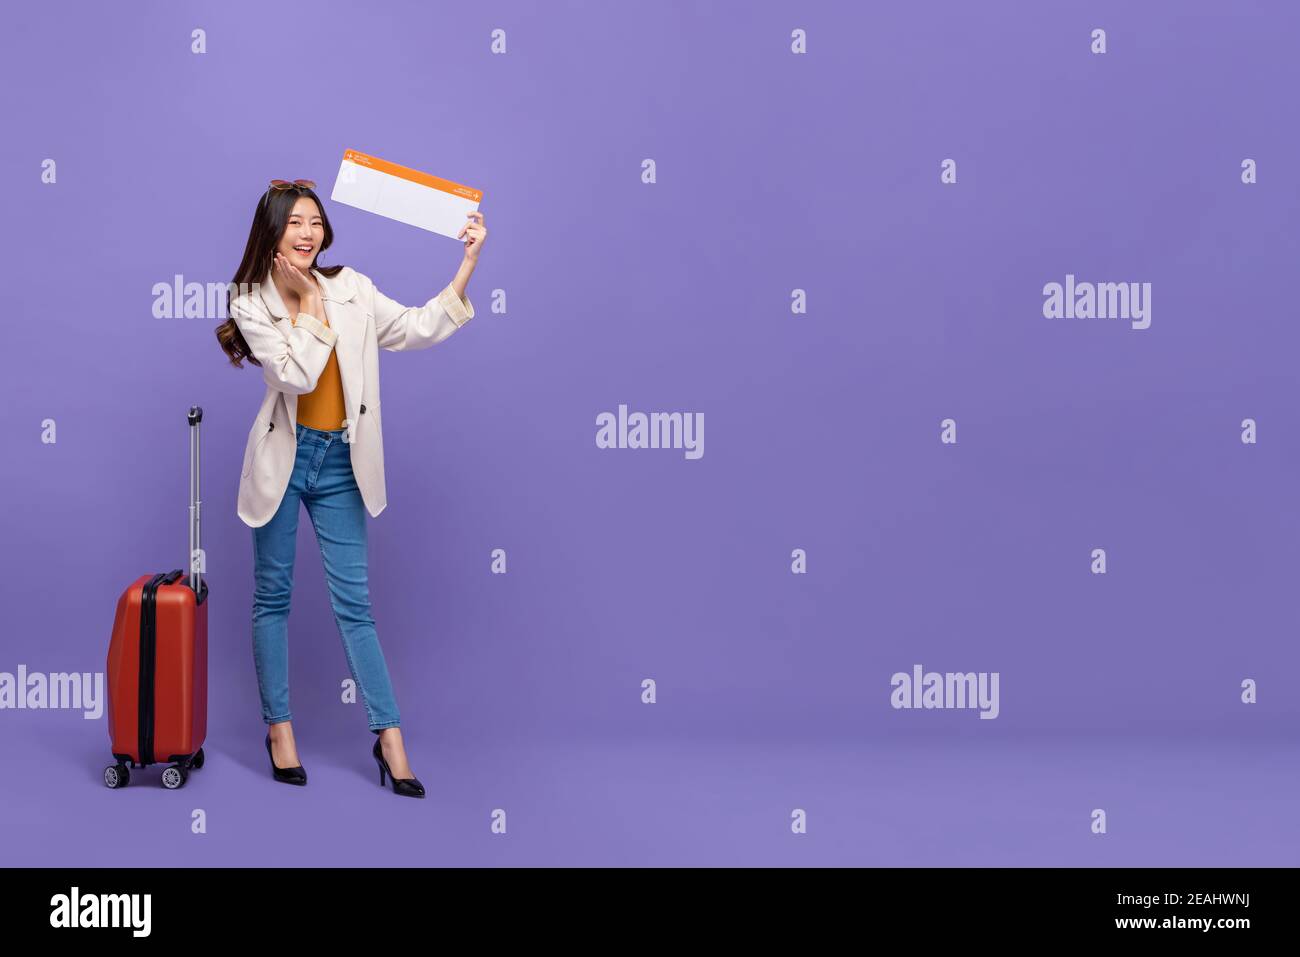 Full body of attractive young Asian woman tourist with luggage showing confirmed boarding pass isolated on purple background with copy space Stock Photo